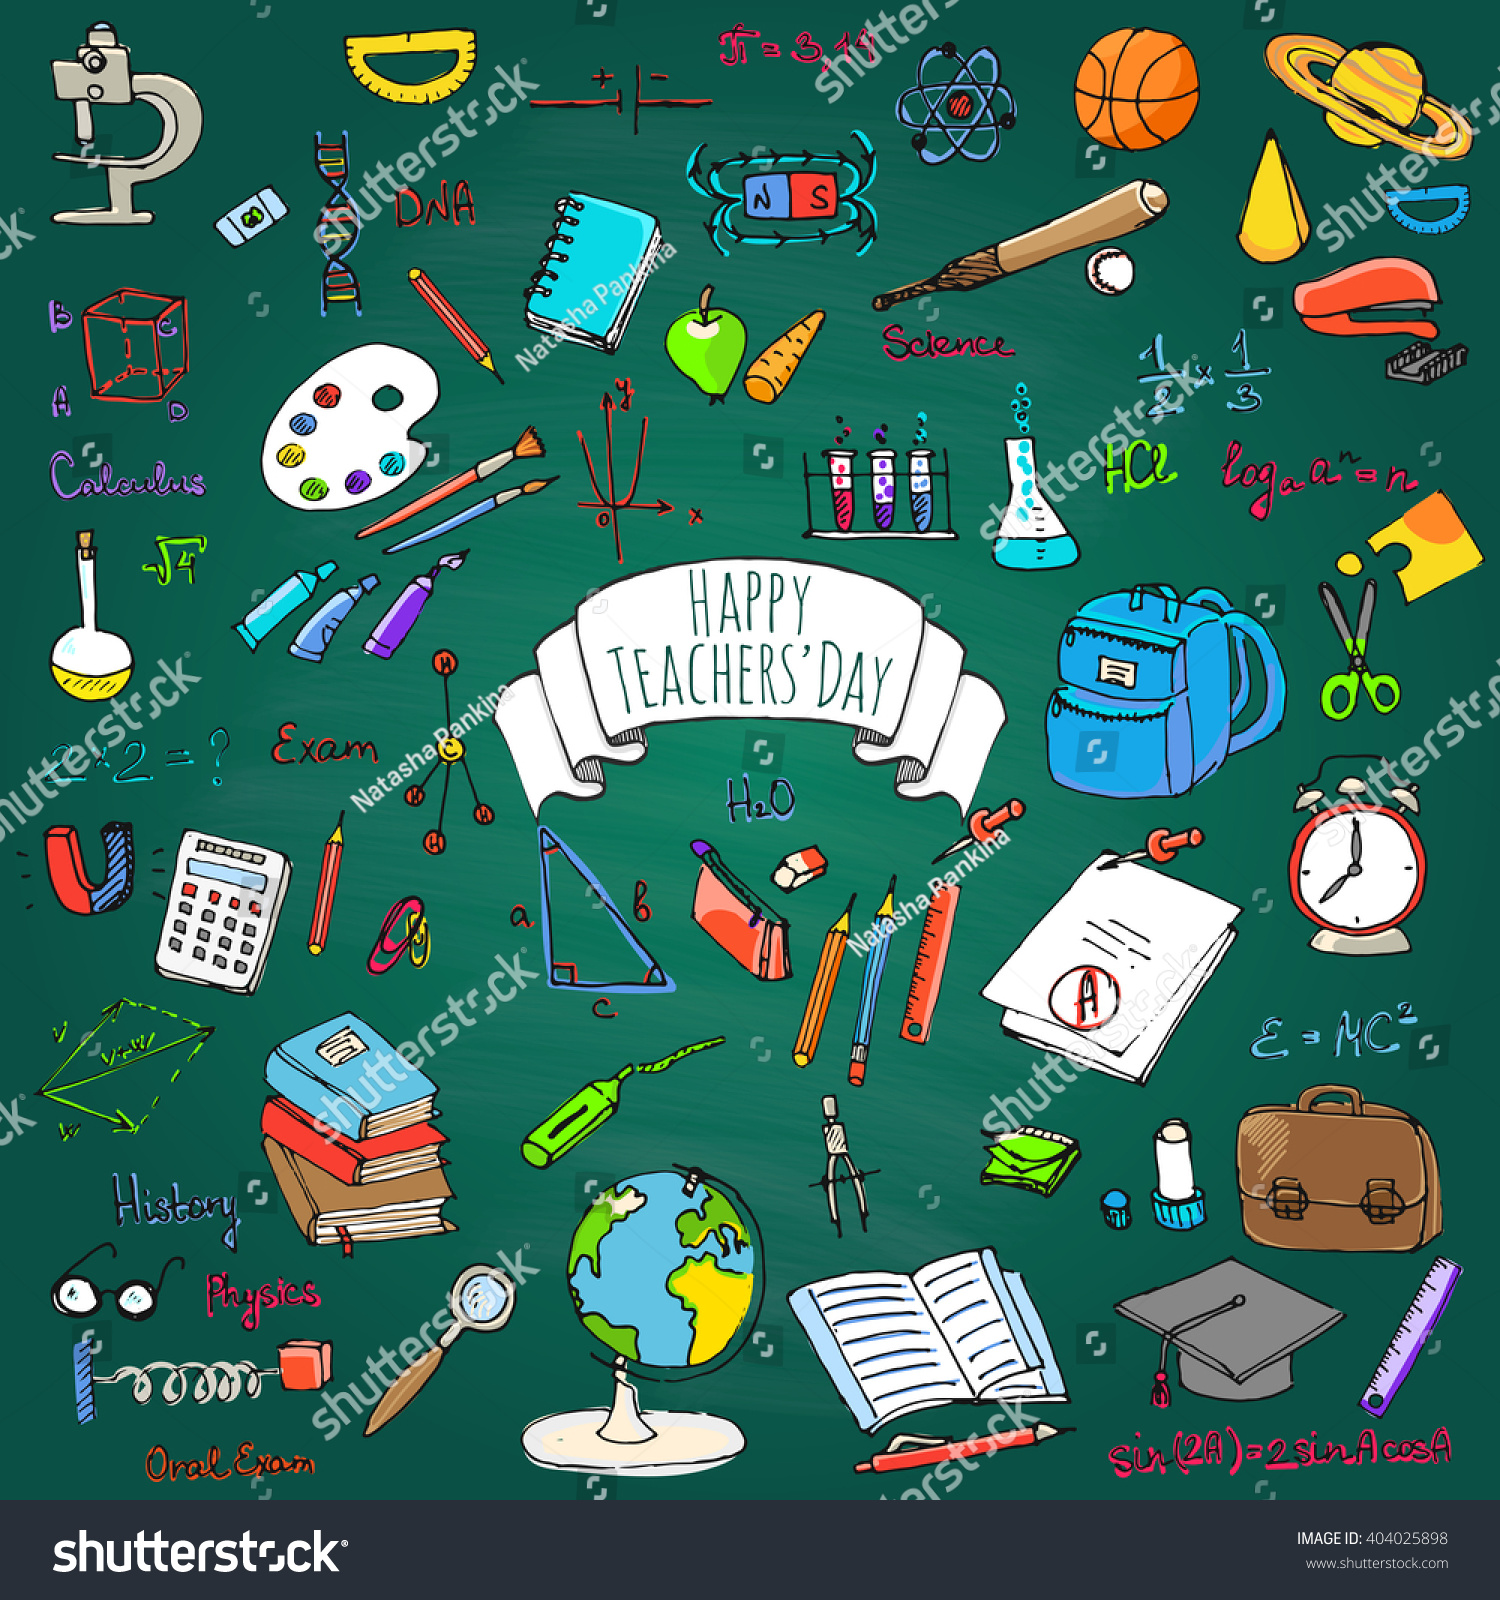 Royalty Free Happy Teachers Day Freehand Drawing 404025898 Stock